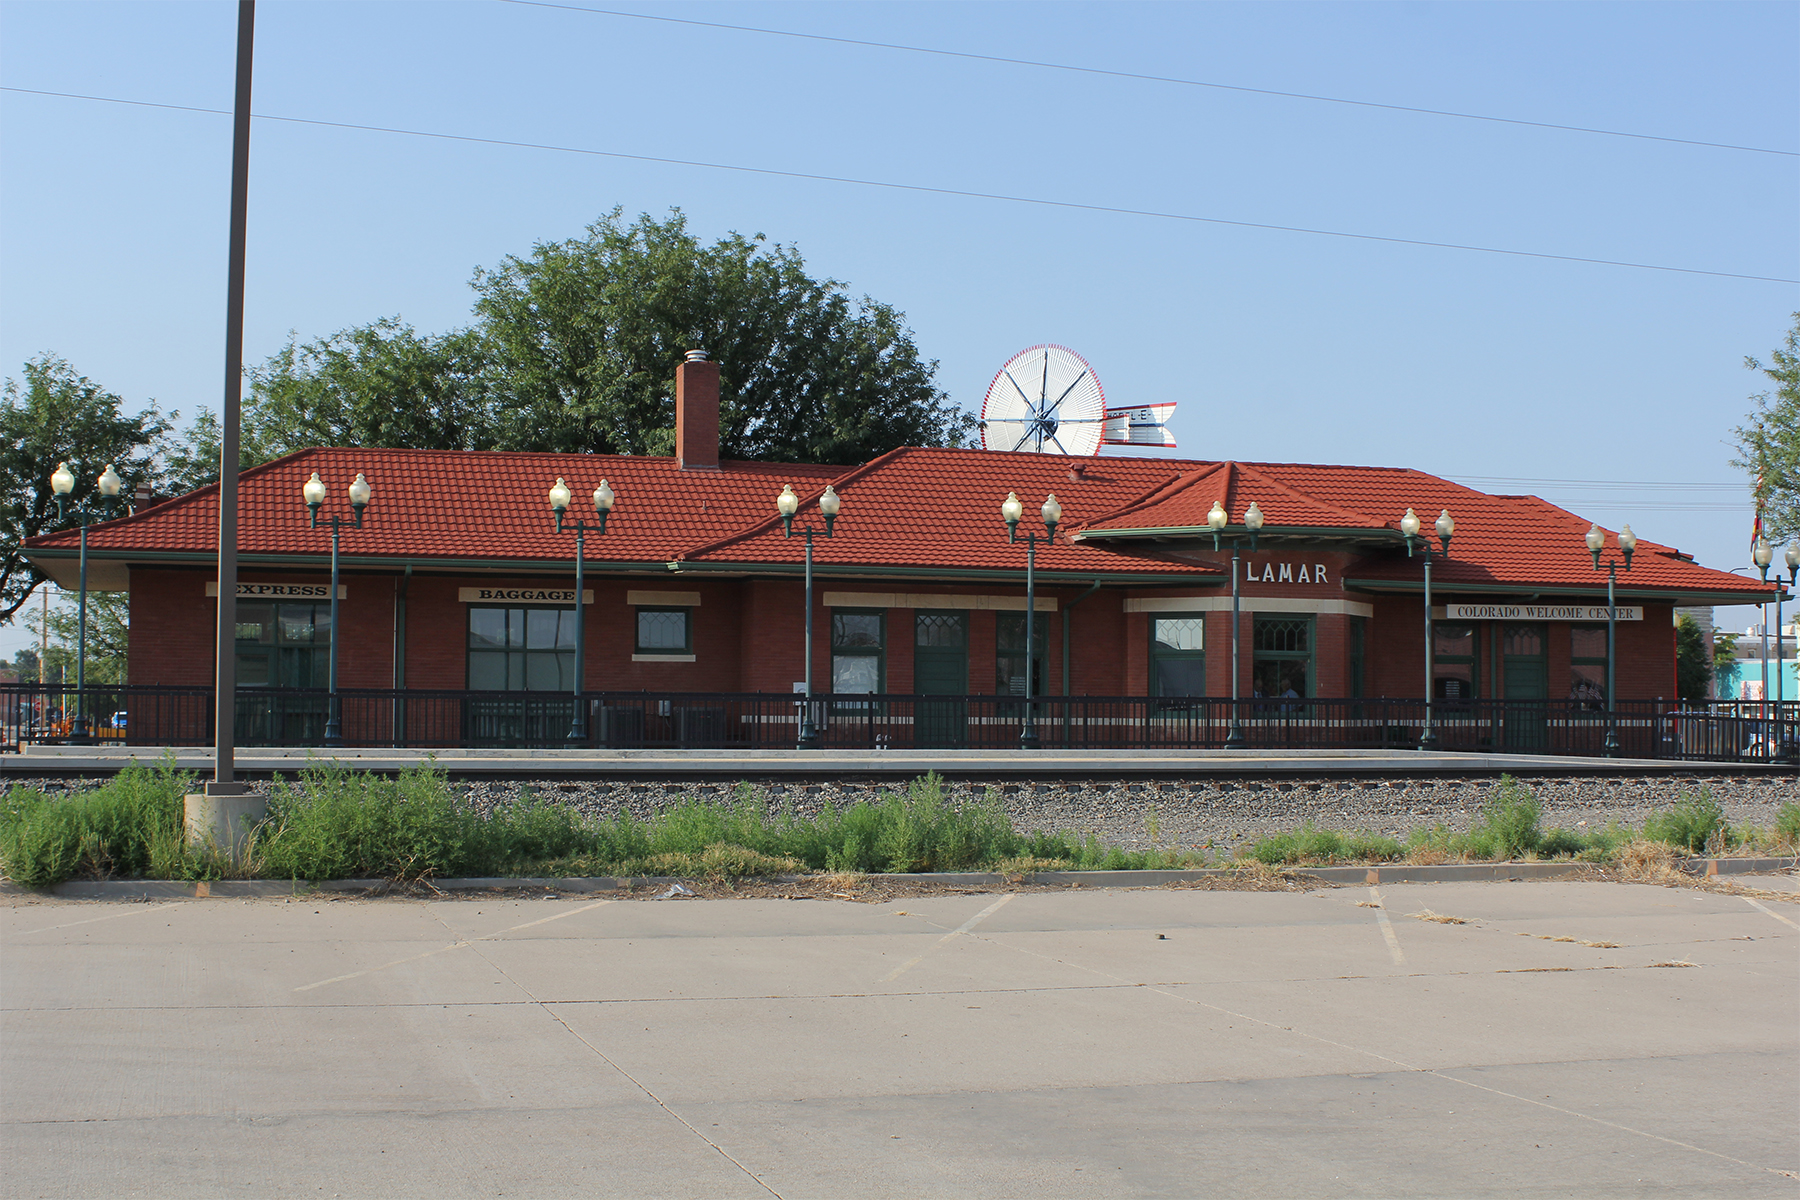 A photo of the Atchison, Topeka and Santa Fe Railway Passenger Depot